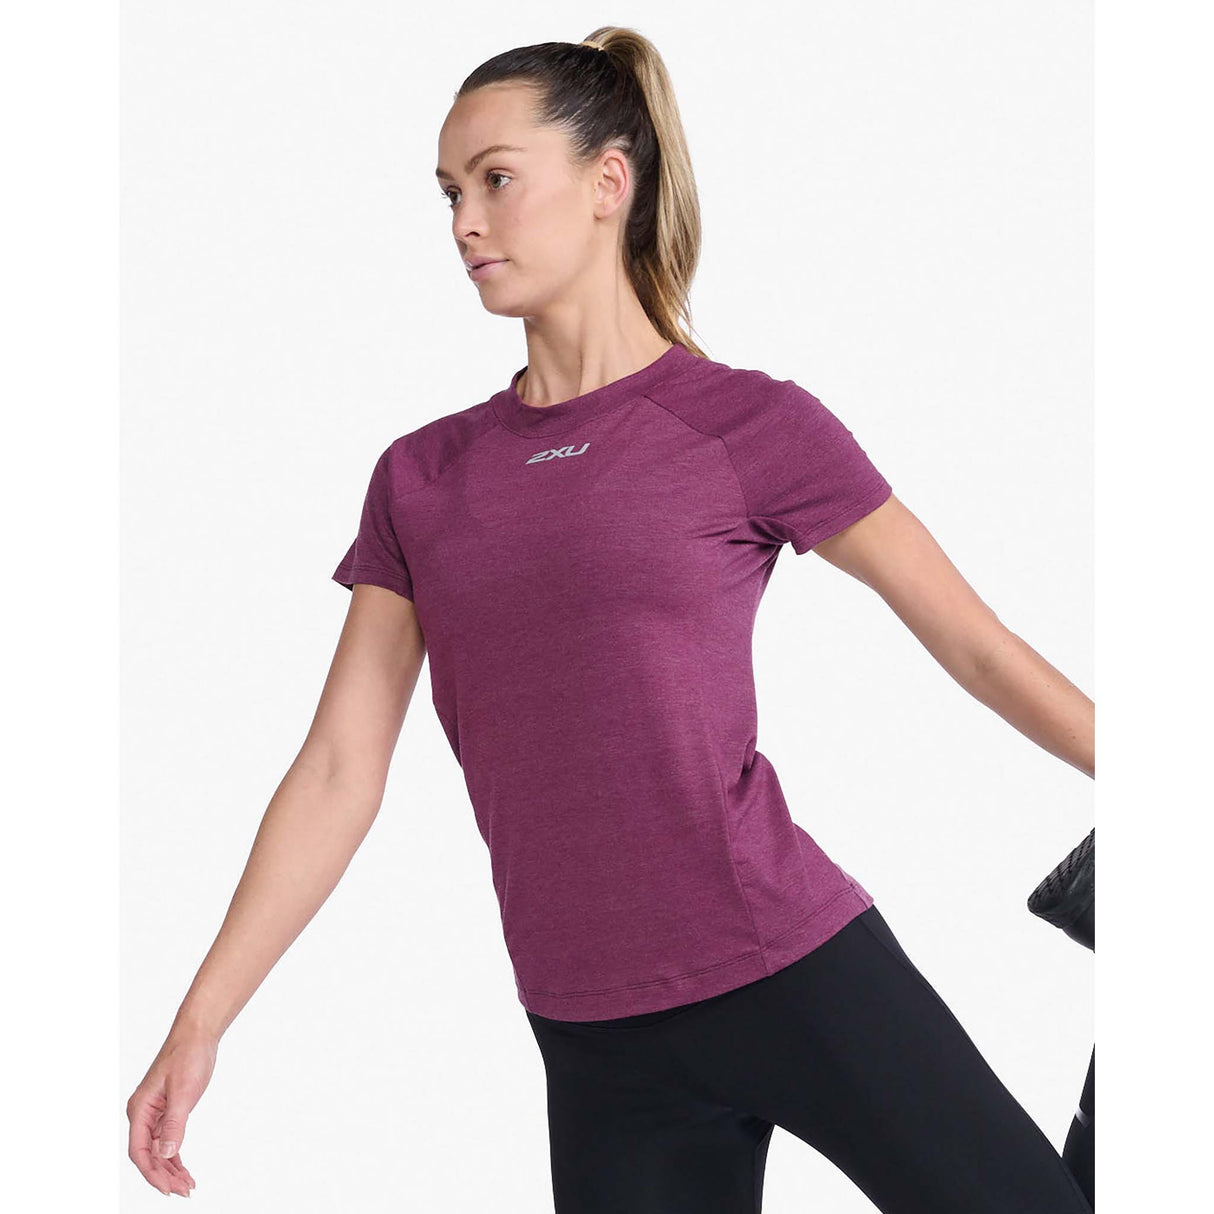 2XU Ignition Base Layer T-shirt sport beet marle femme lateral